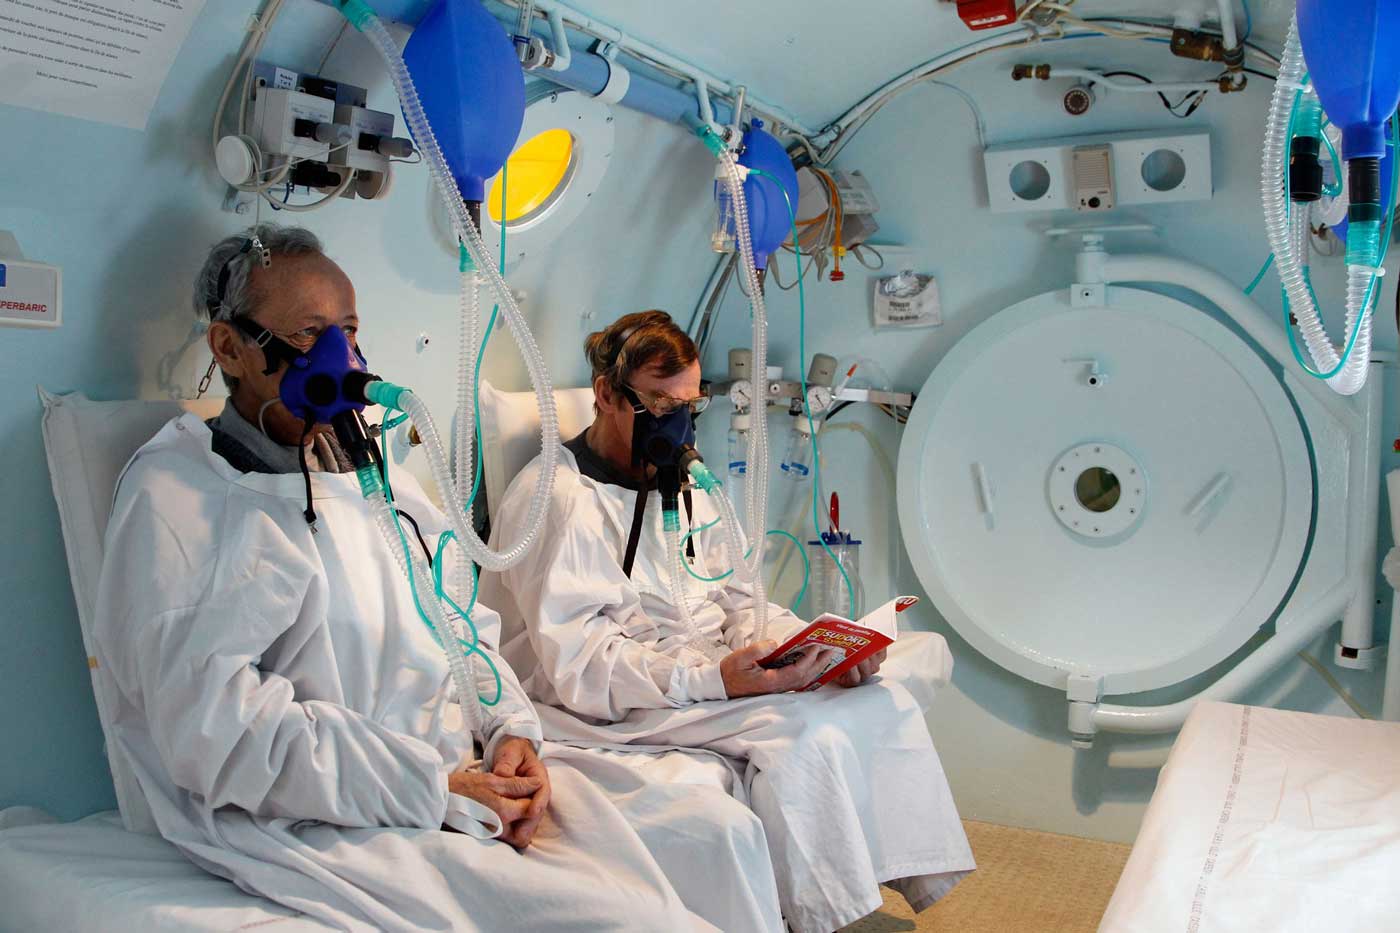 A multiplace hyperbaric chamber